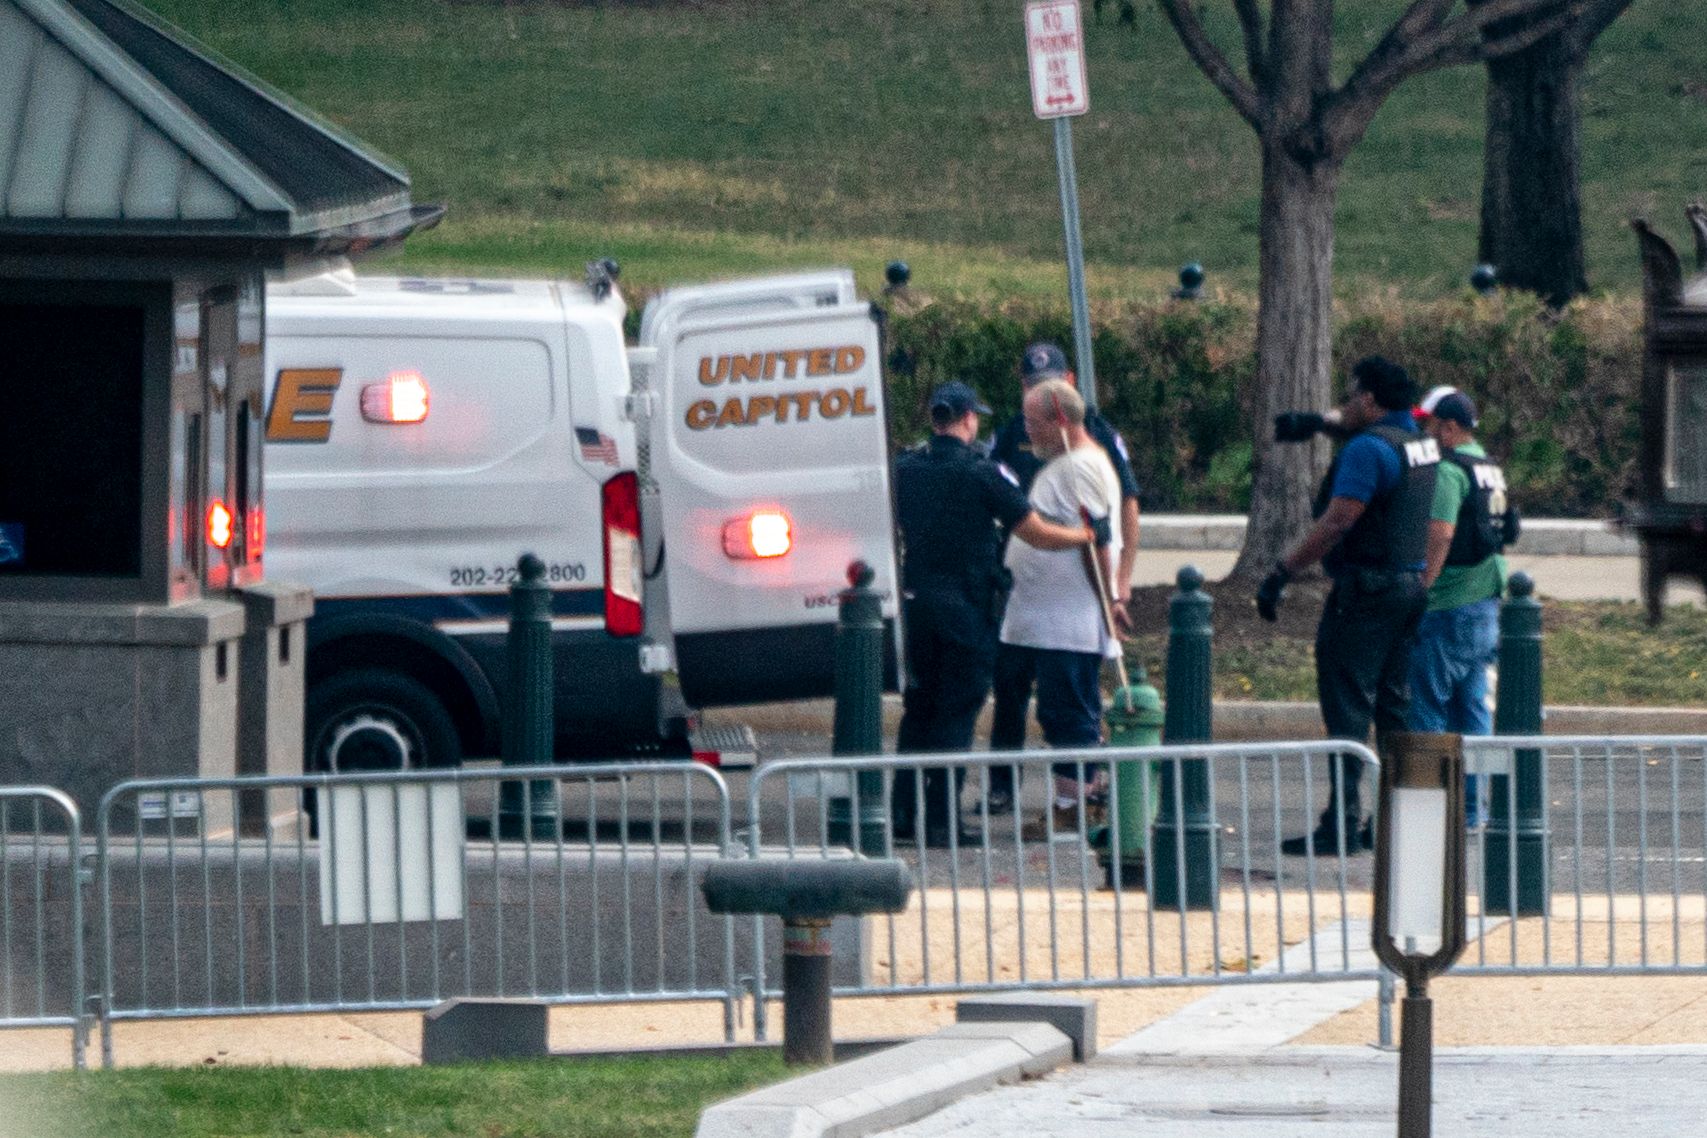 PHOTO: Police take into custody a man who barricaded himself in his vehicle in front of the U.S. Supreme Court Building on Capitol Hill in Washington, D.C., Oct. 5 2021.